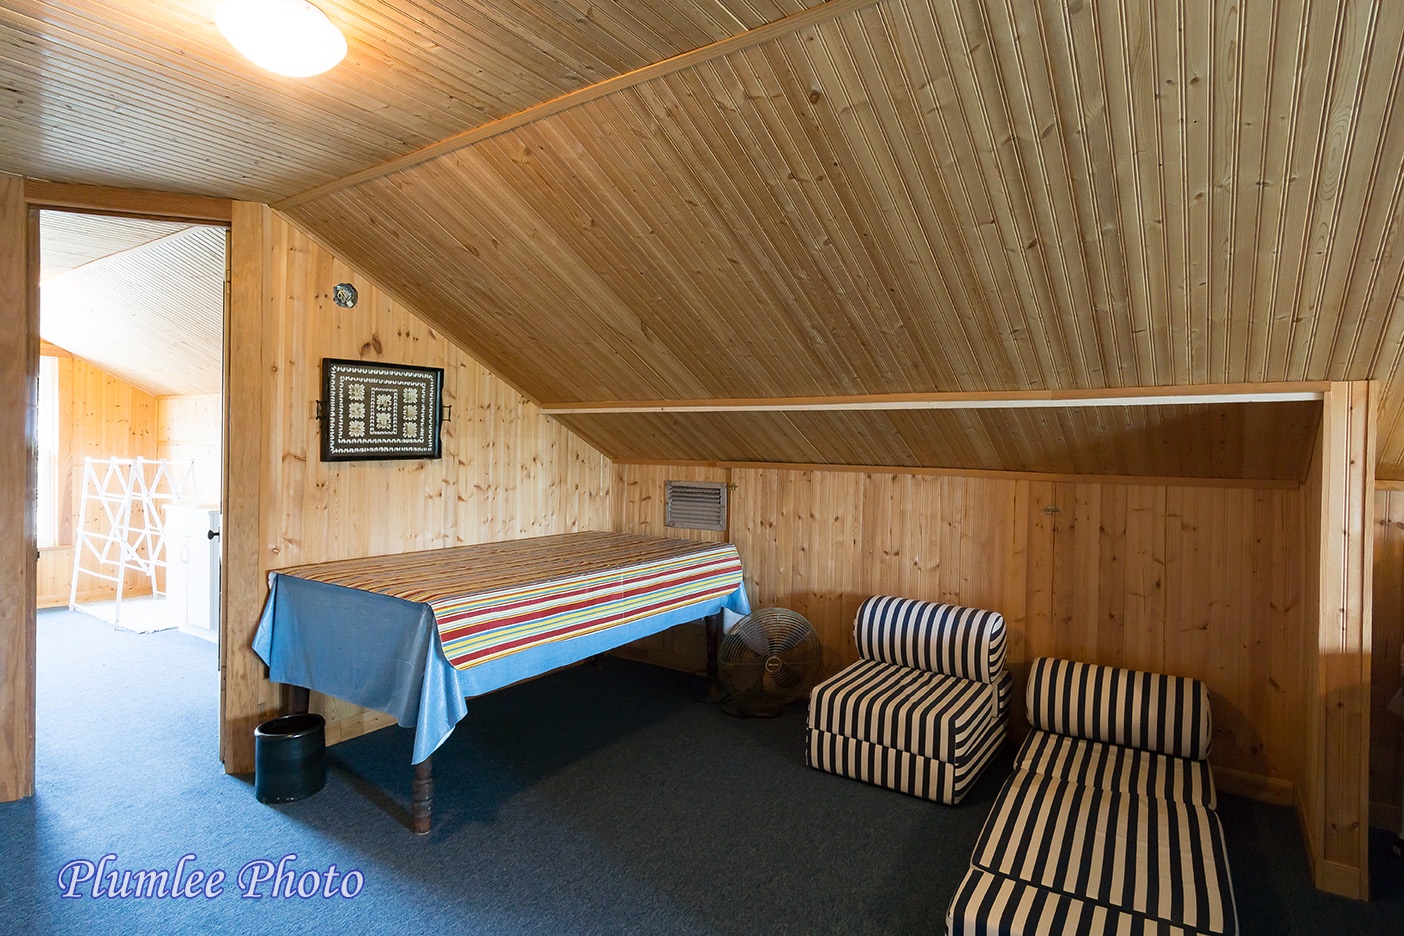 3rd Floor.  Bedroom 4 has portable, convertible seating the kids will love.